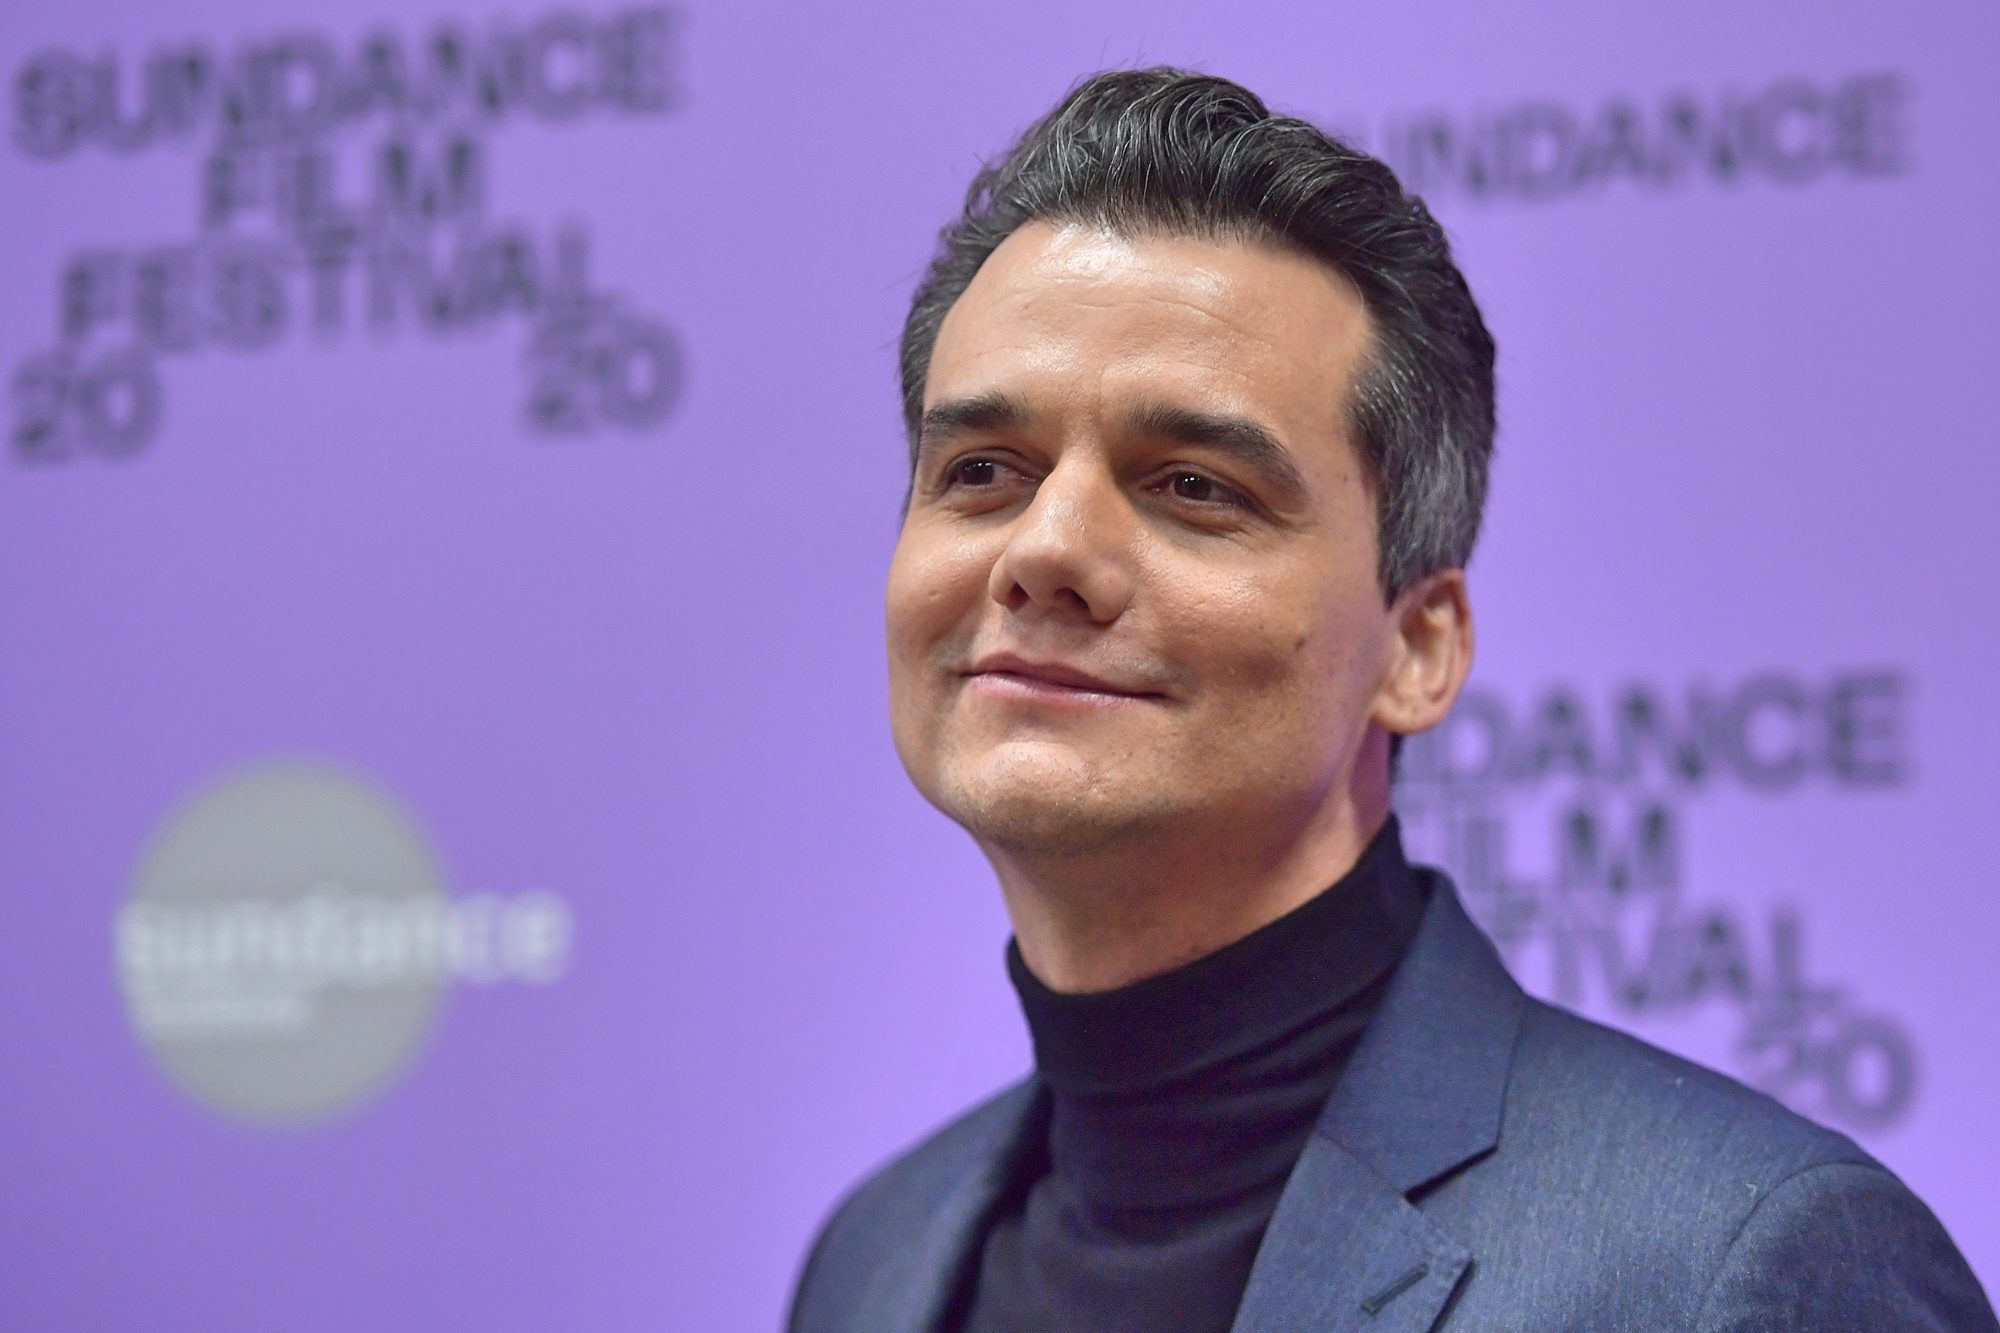 Sundance Interview: Wagner Moura, Back on Screen and Behind the